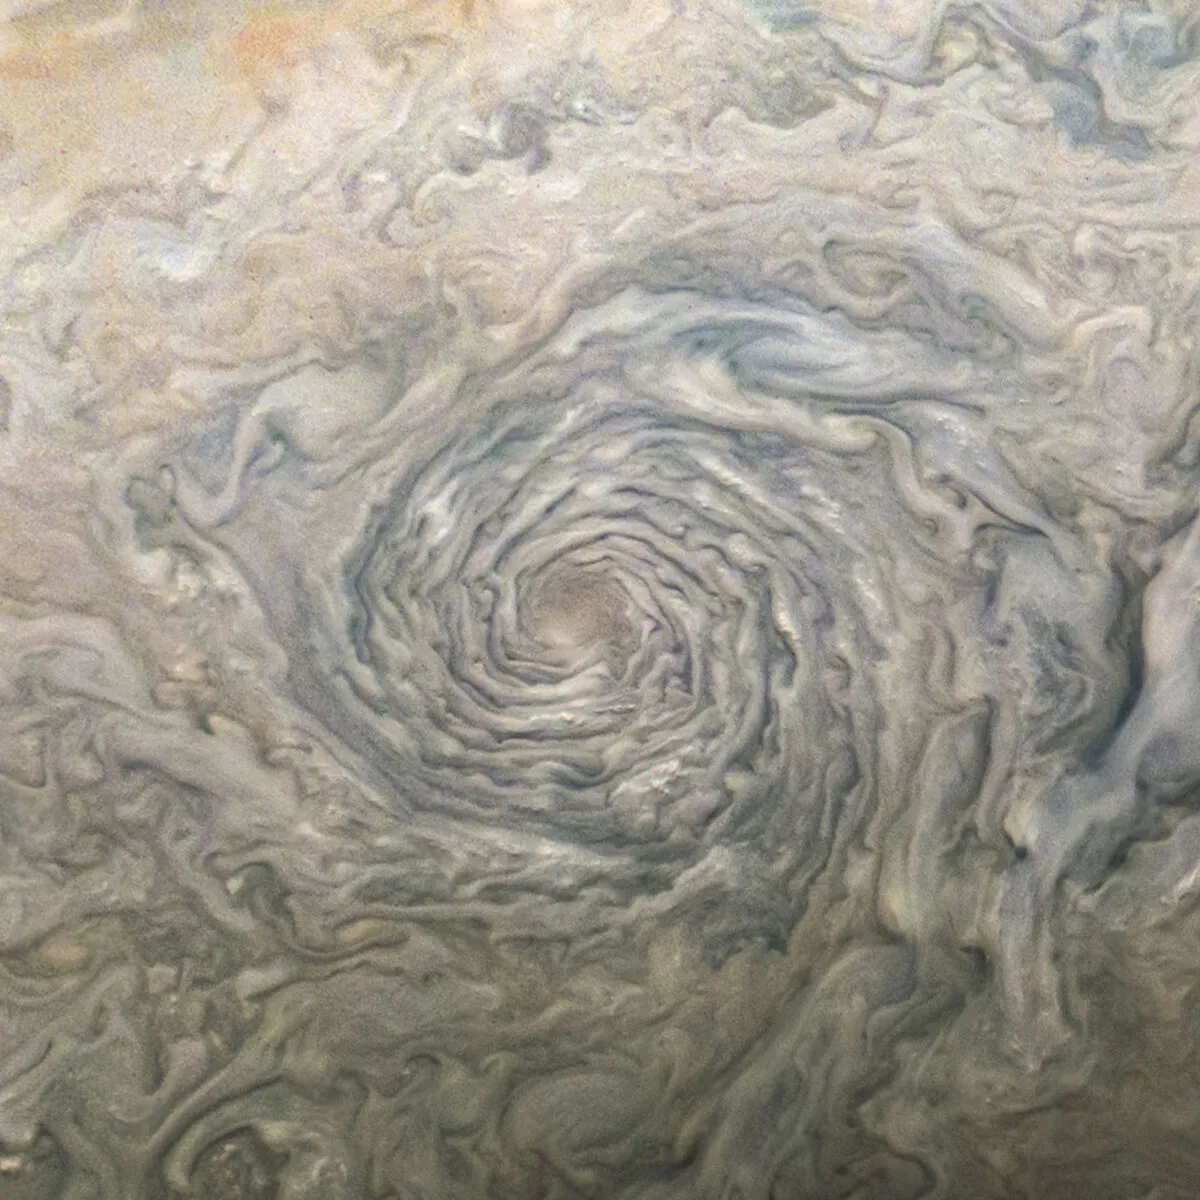 A 2,000km-wide cyclonic storm on Jupiter, captured by the Juno spacecraft. Image data: NASA/JPL-Caltech/SwRI/MSSS / Image processing by Kevin M. Gill, © CC BY